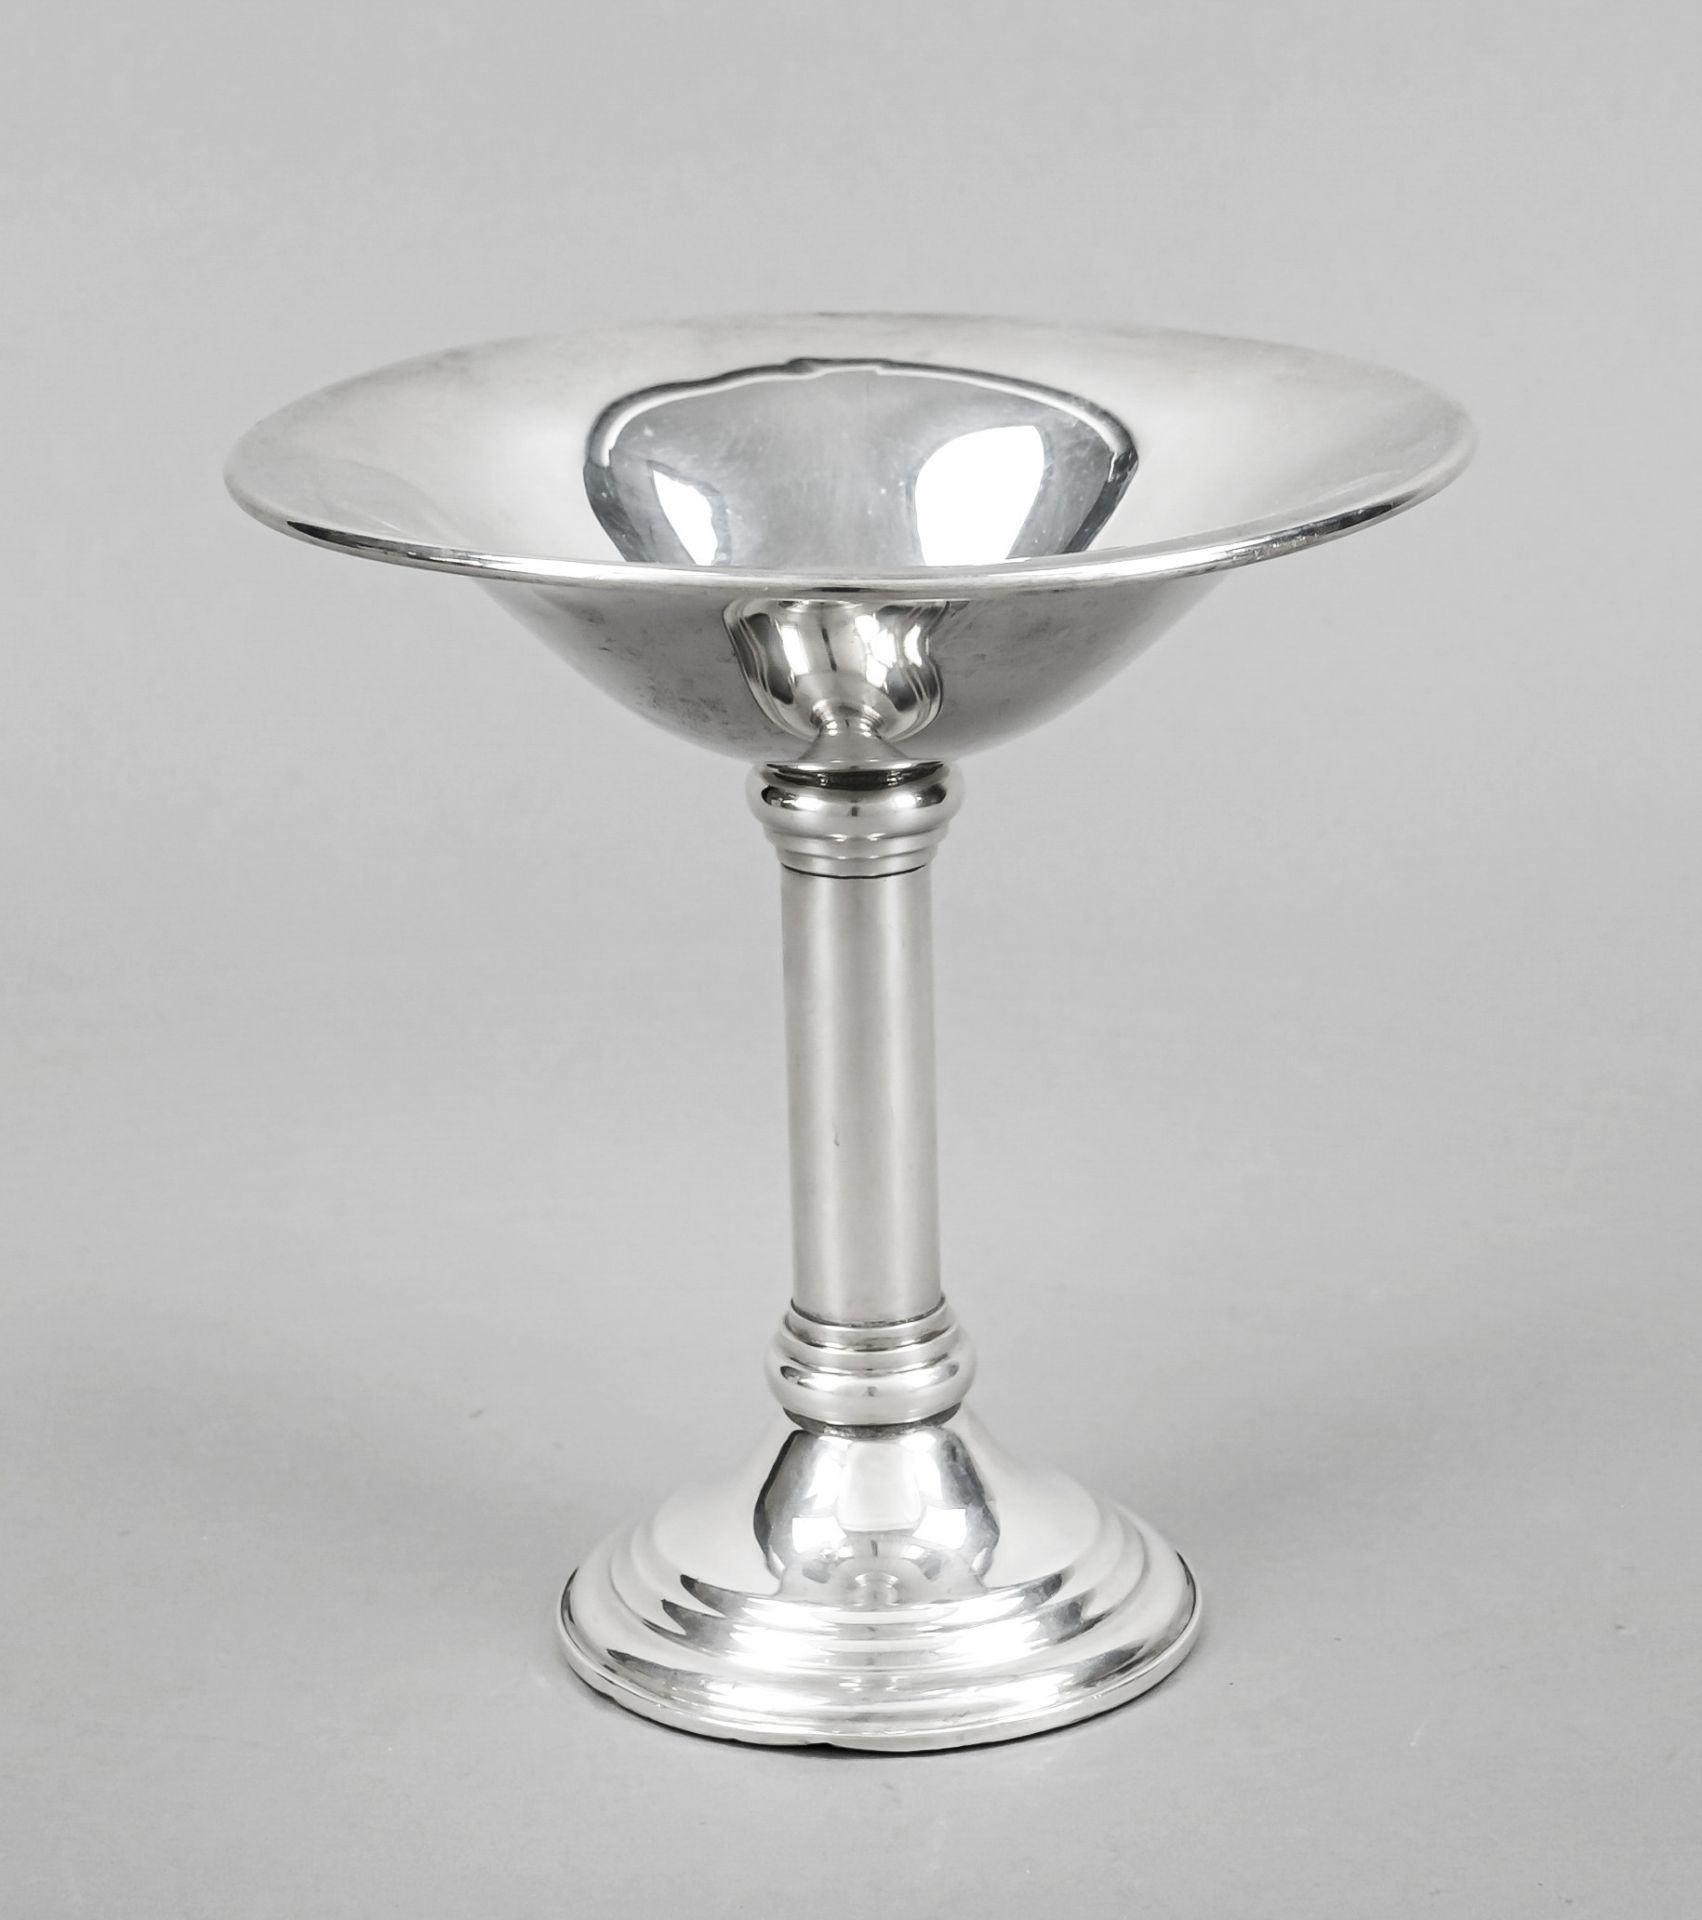 A top bowl, USA, 20th century, sterling silver 925/000, round stepped and filled stand, column